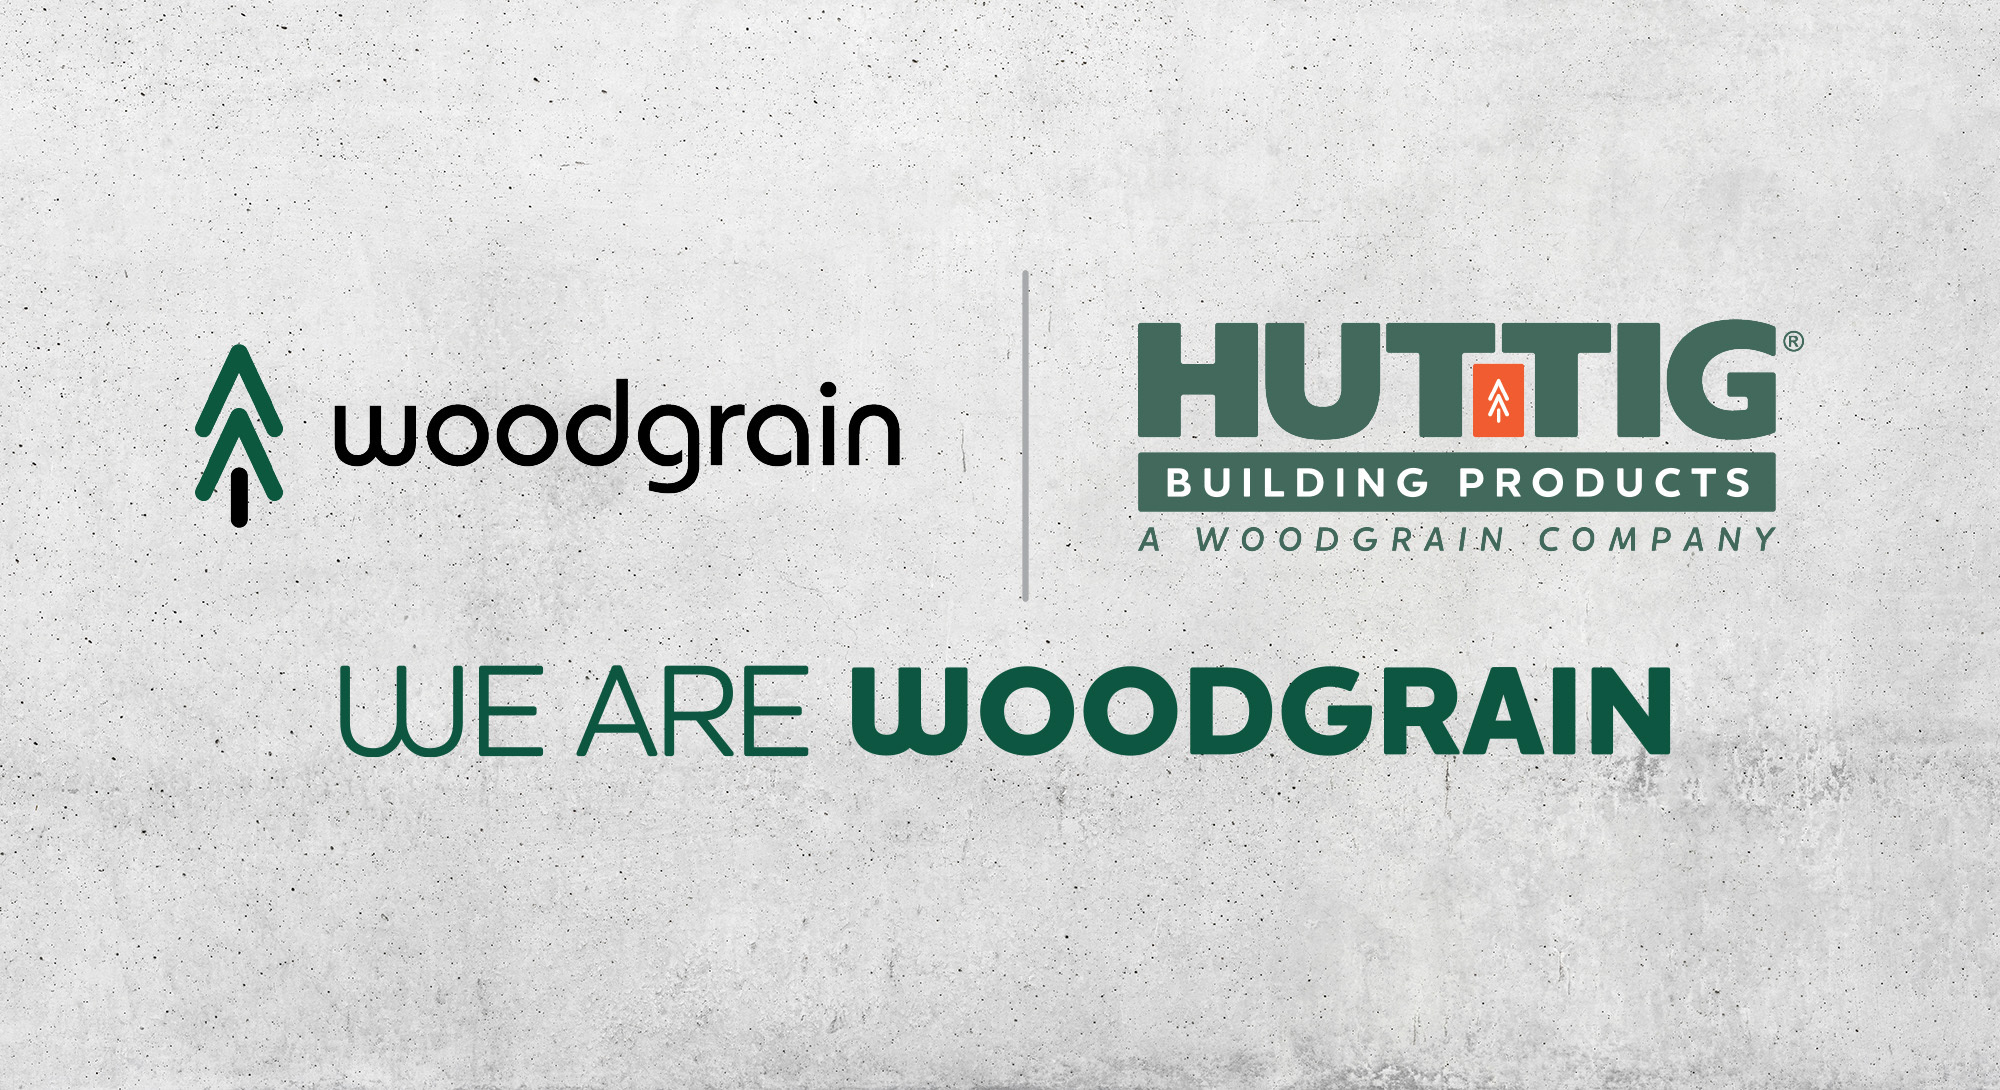 Woodgrain Selects Rocky Mount for $7.5 Million Expansion